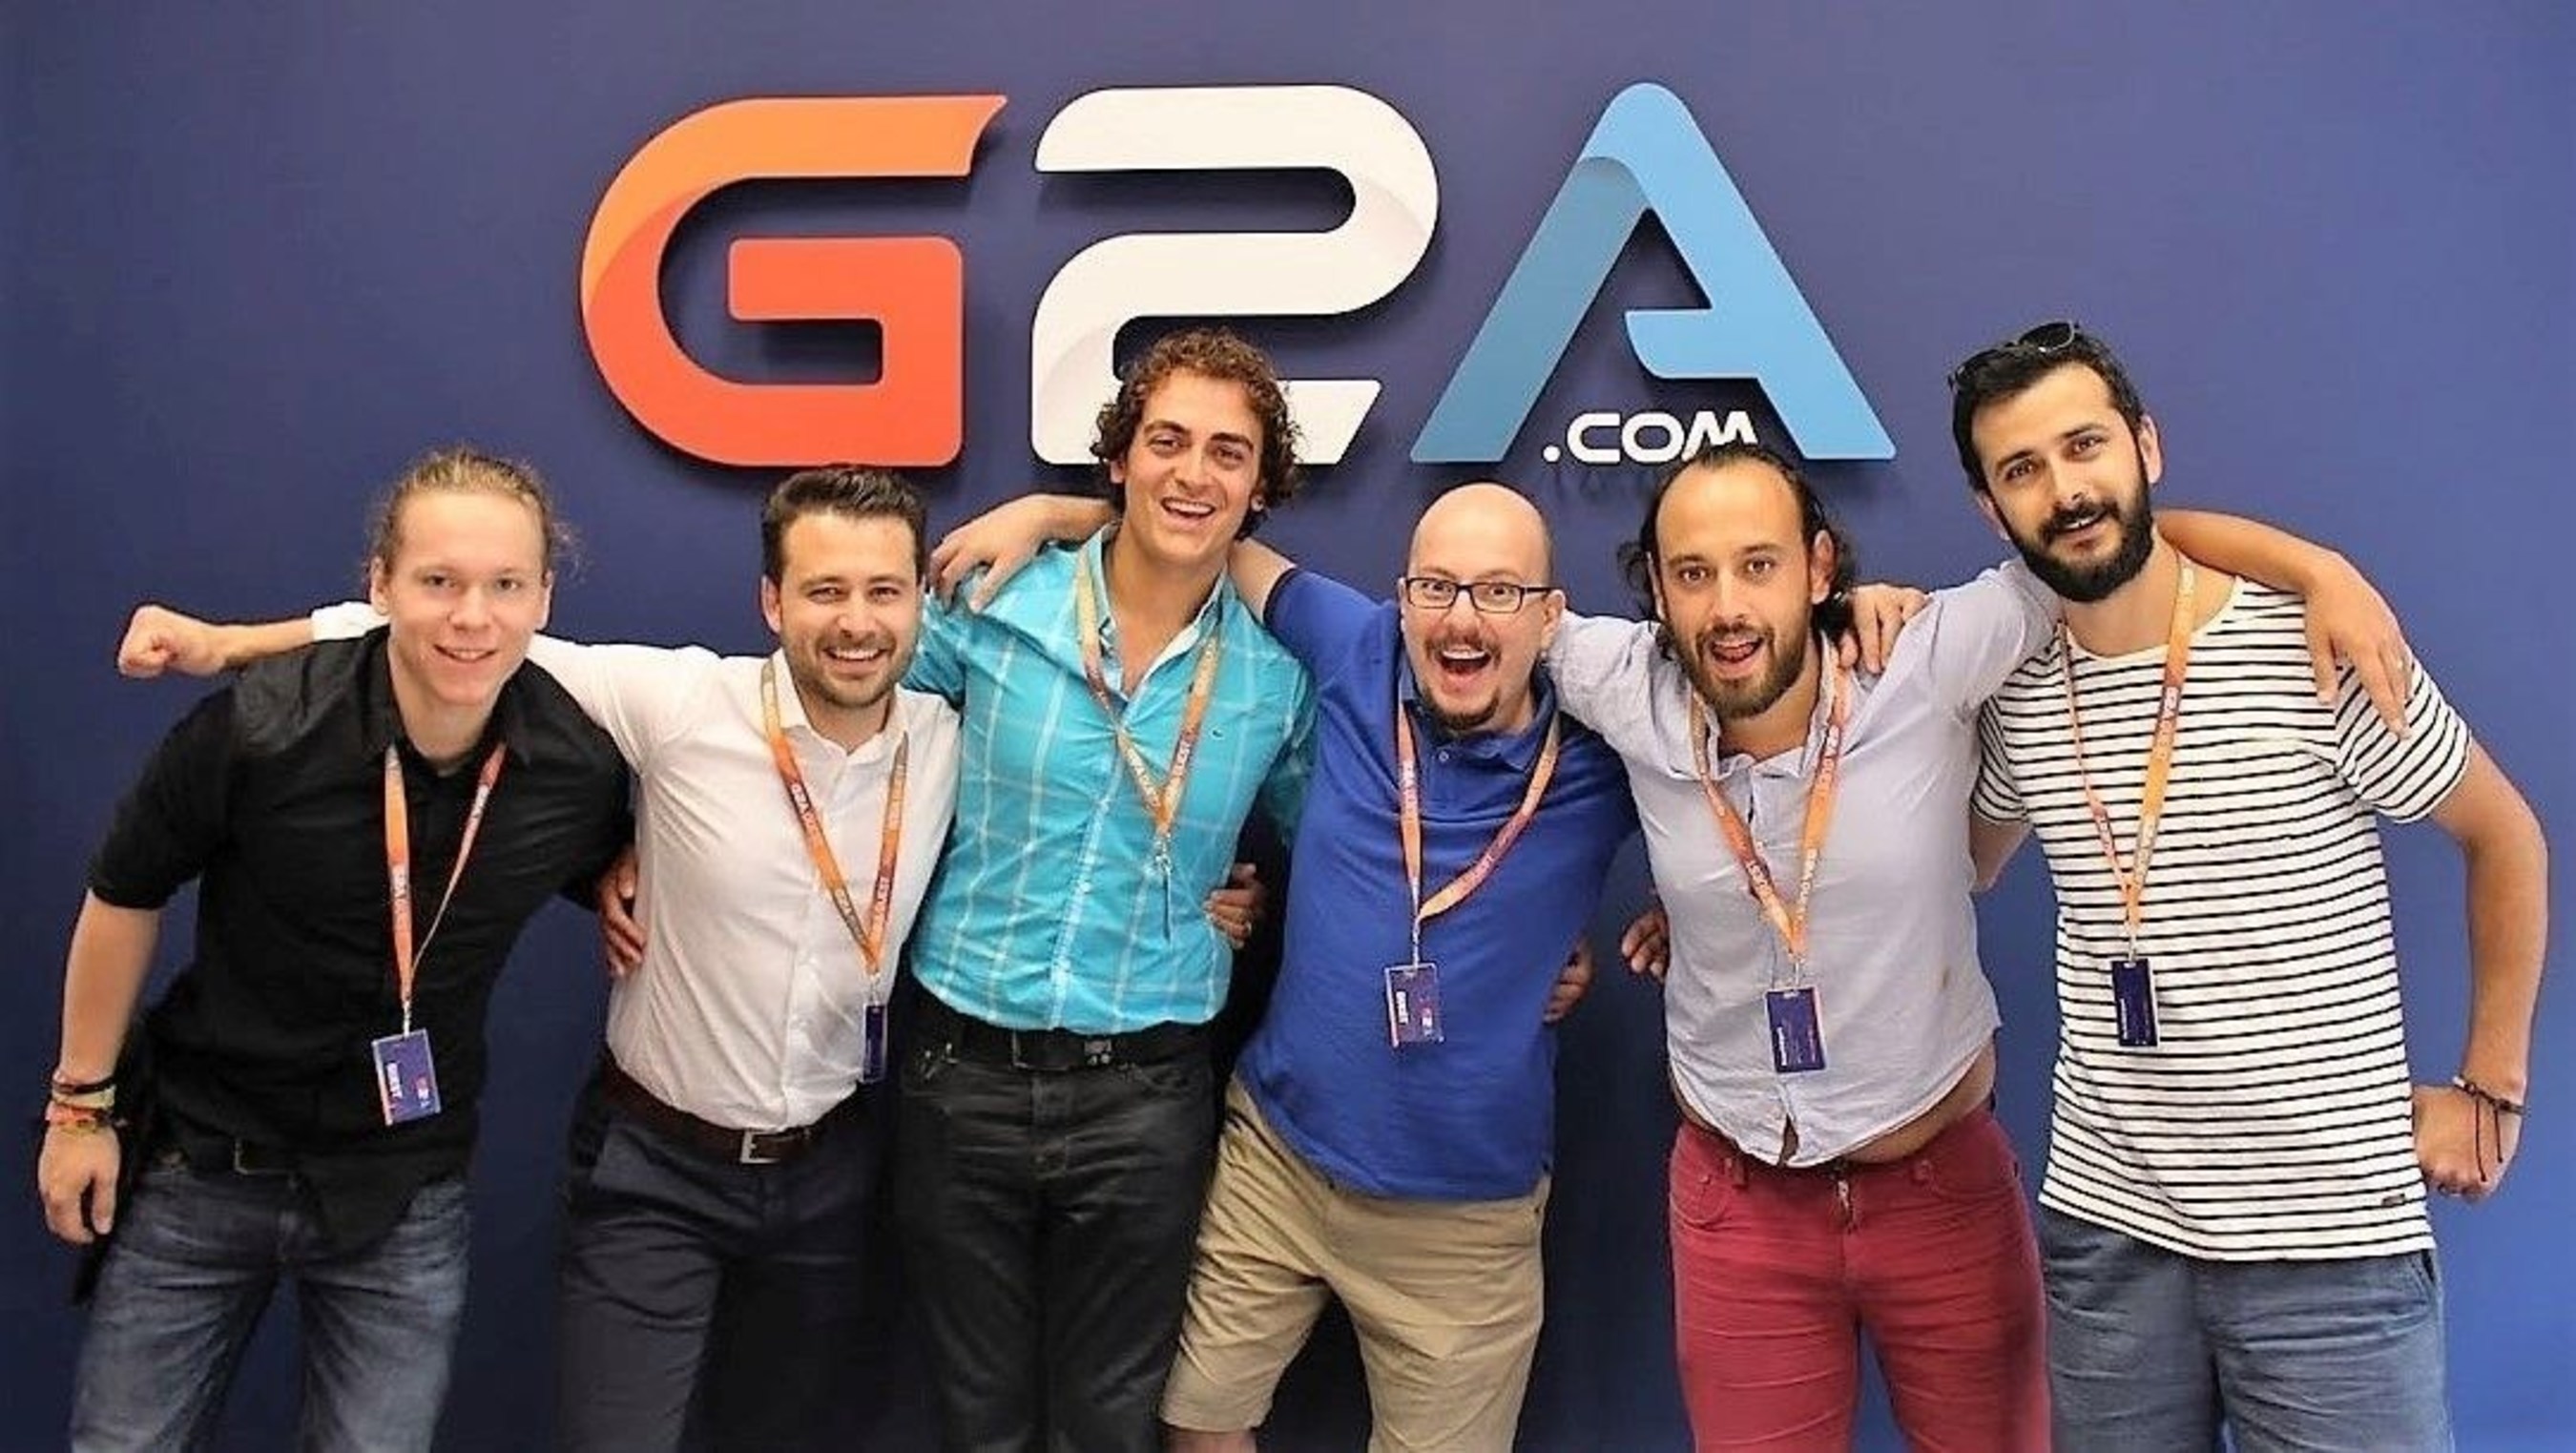 Some of the Journalists pose in the G2A meeting room (PRNewsFoto/G2A.COM)